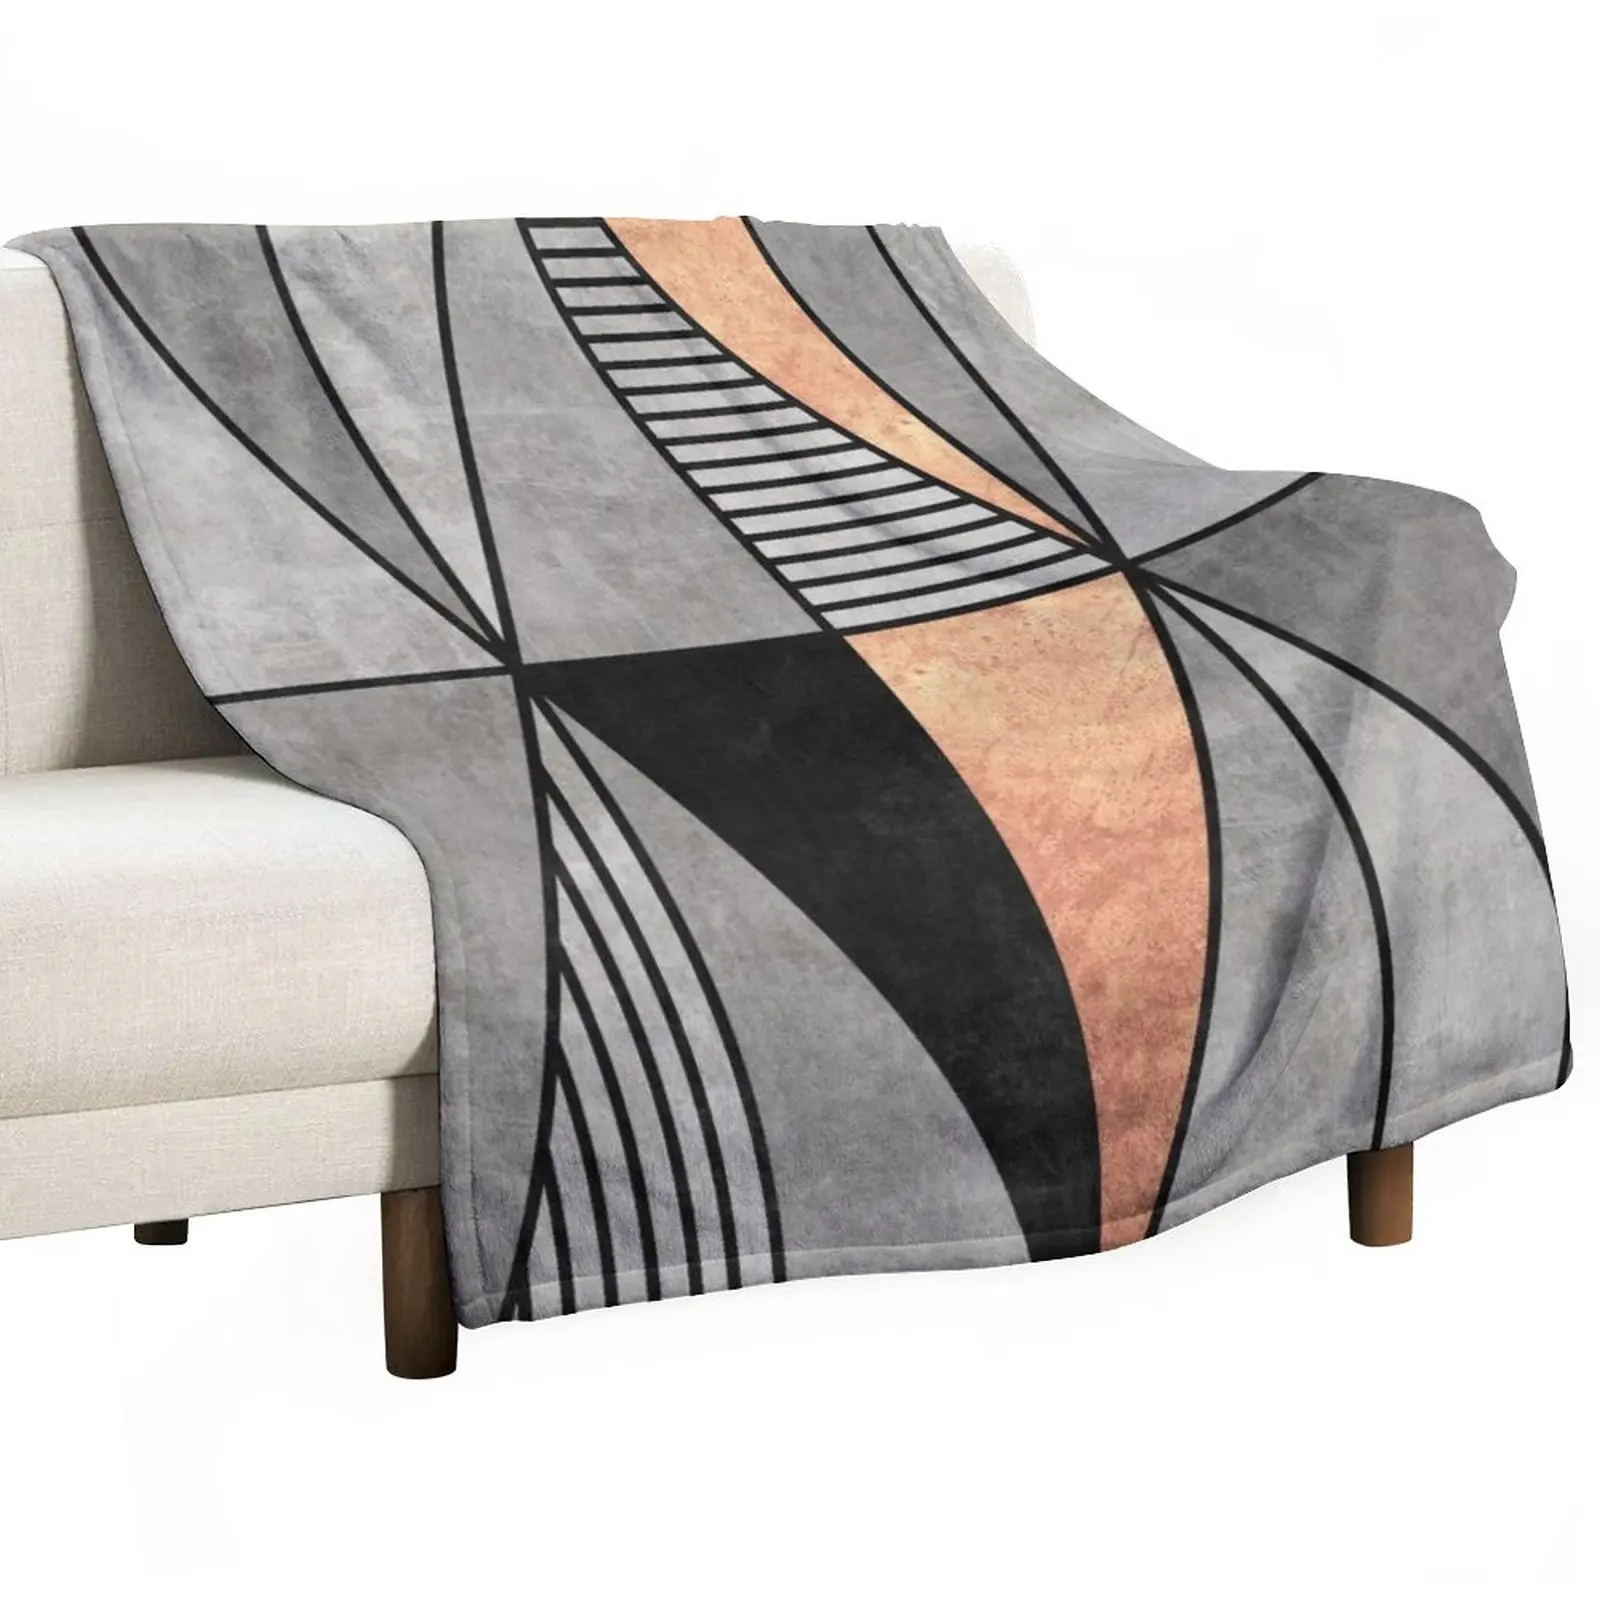 

Concrete and Copper Triangles Throw Blanket Thin Blankets Hairy Blankets Multi-Purpose